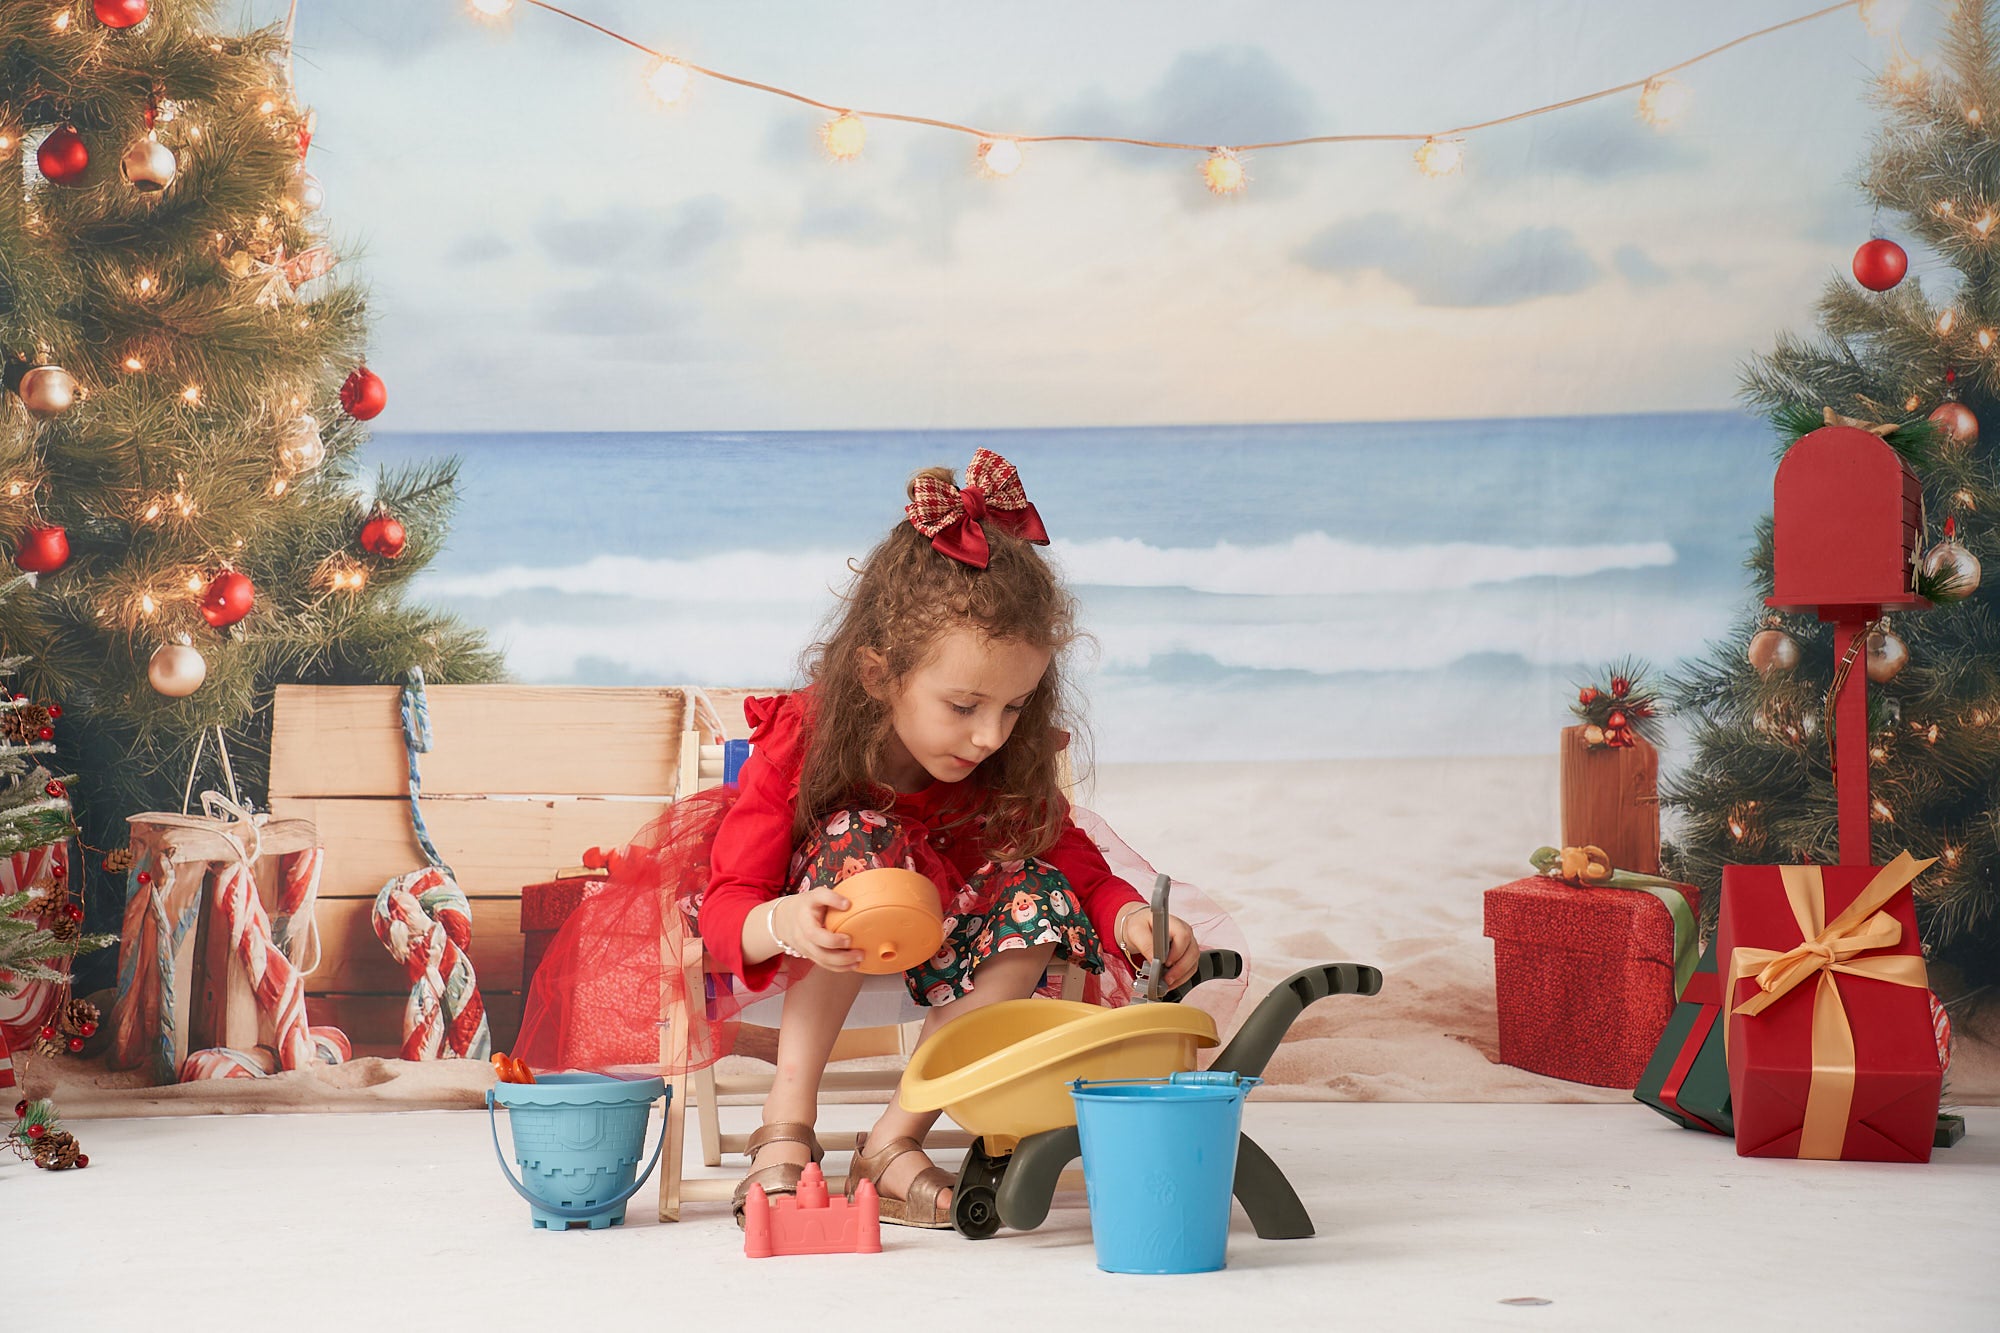 Kate Beach Christmas Backdrop Designed by Chain Photography